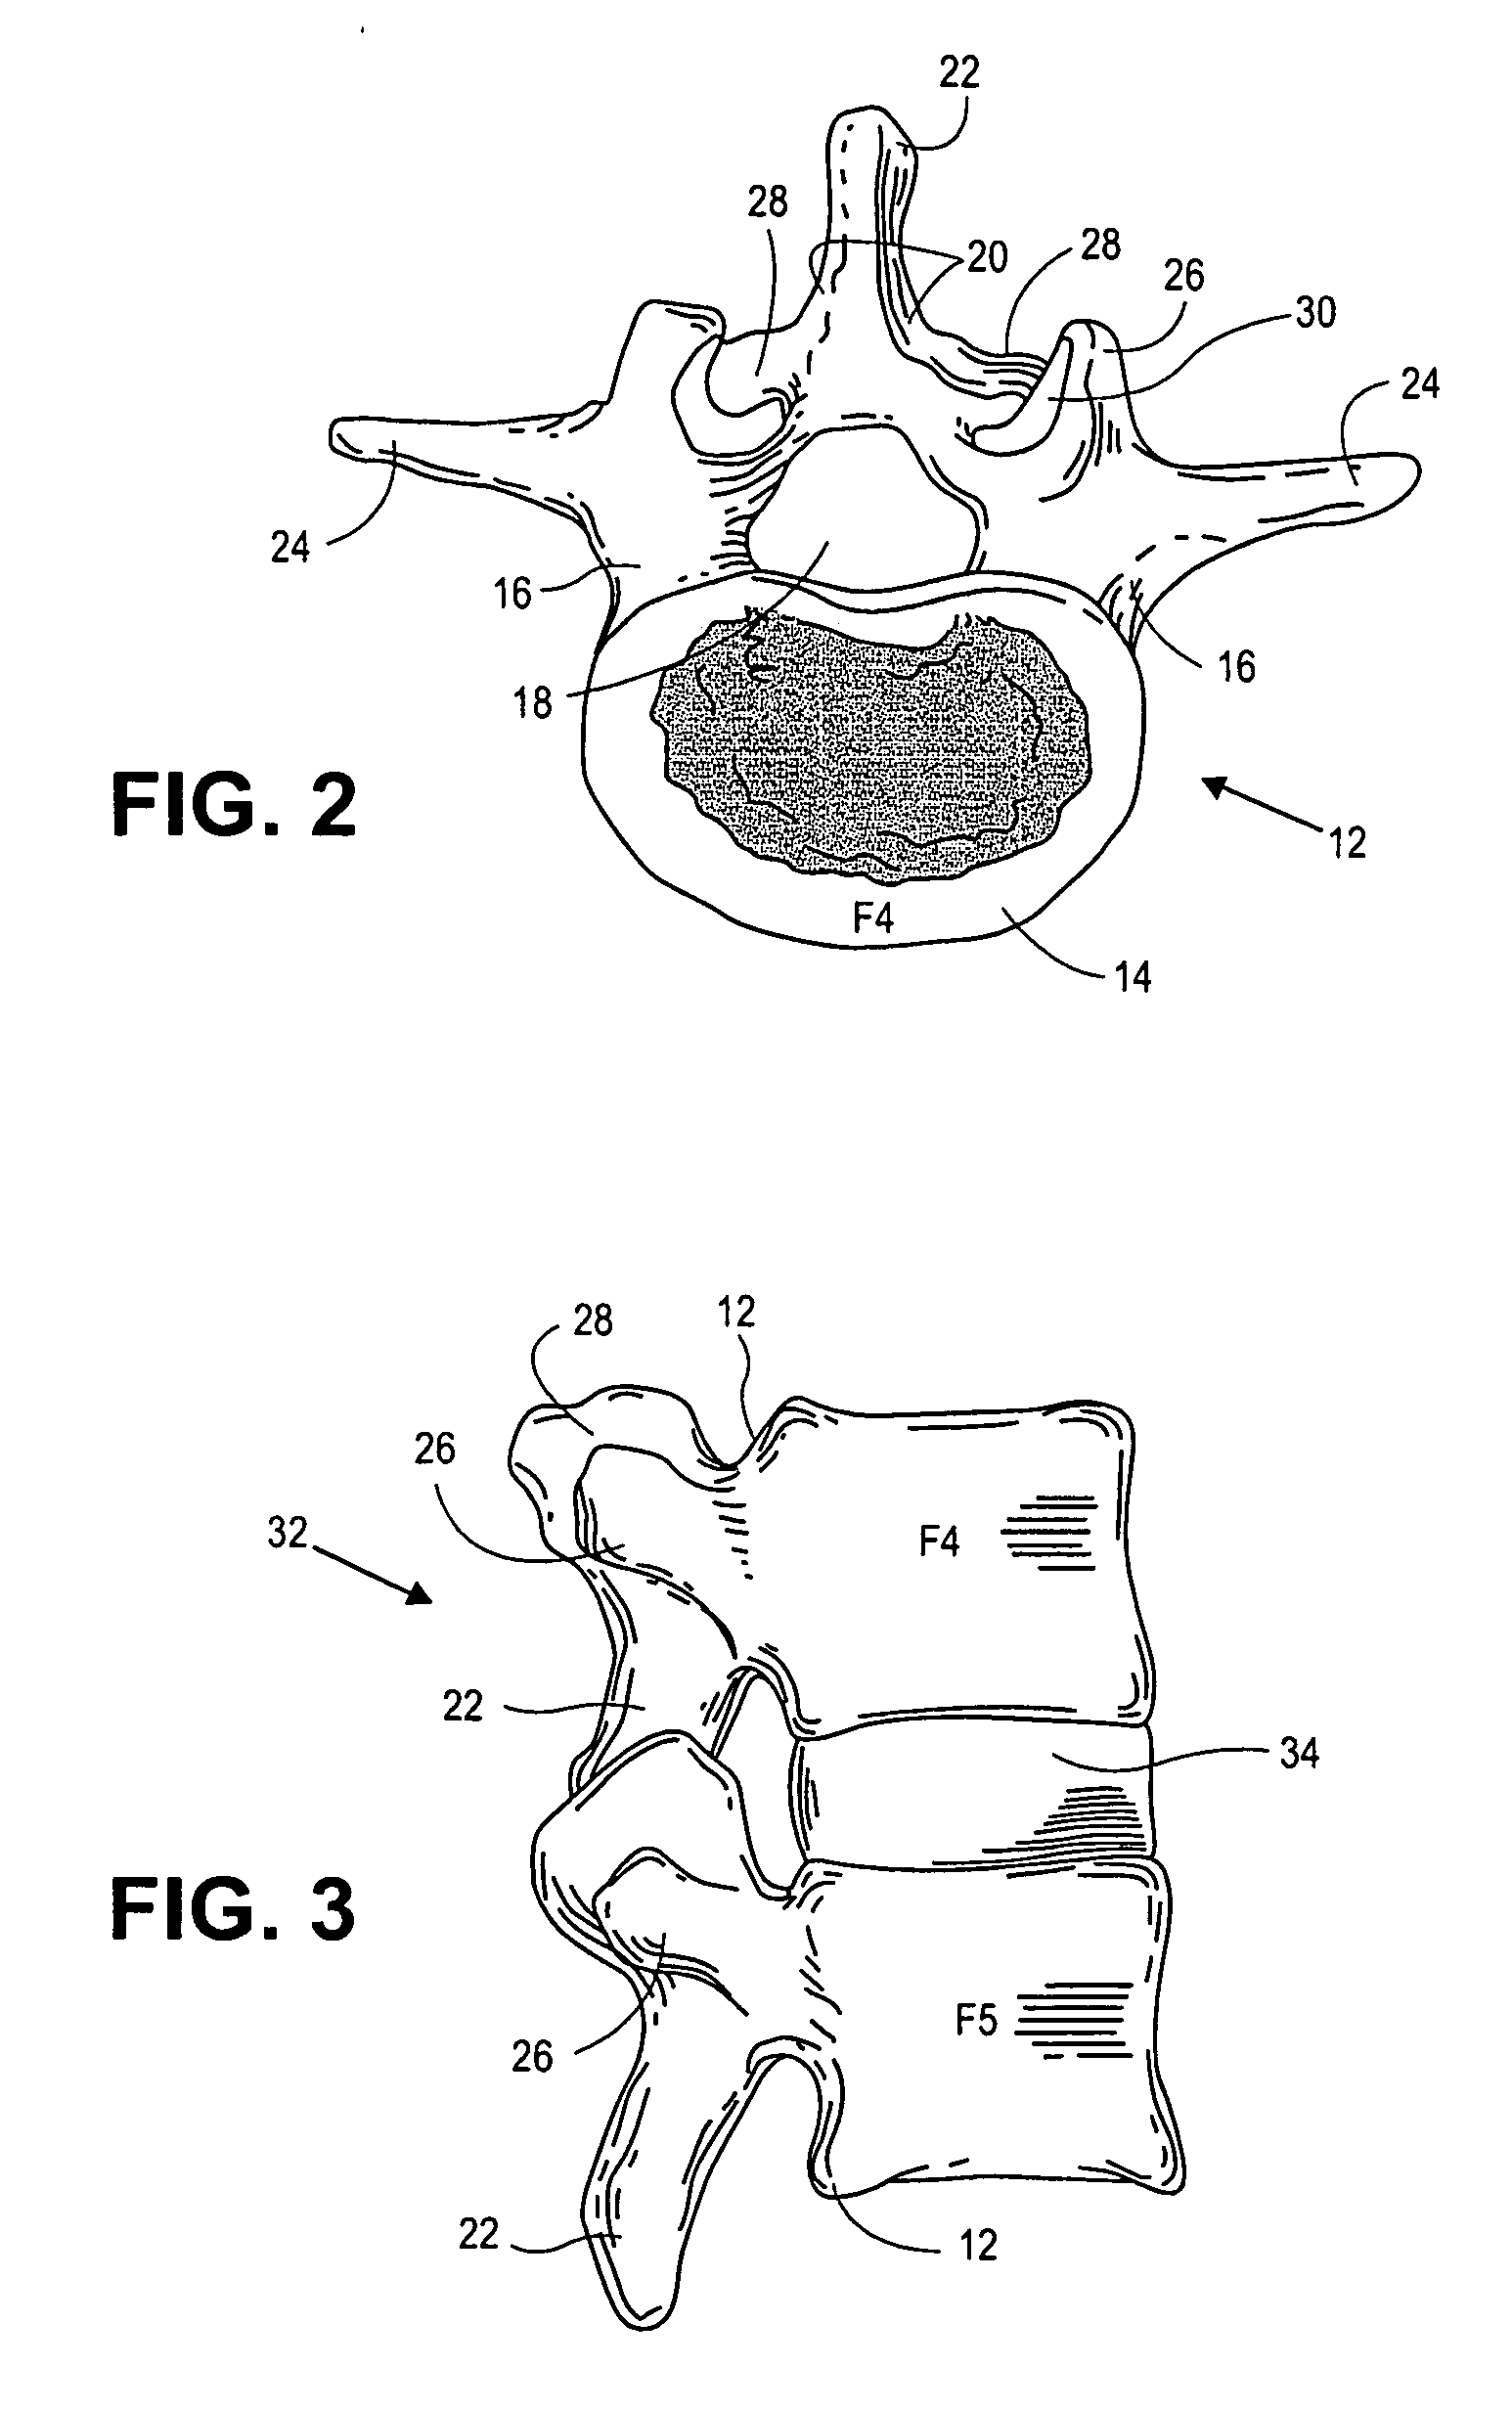 Prostheses, tools and methods for replacement of natural facet joints with artificial facet joint surfaces